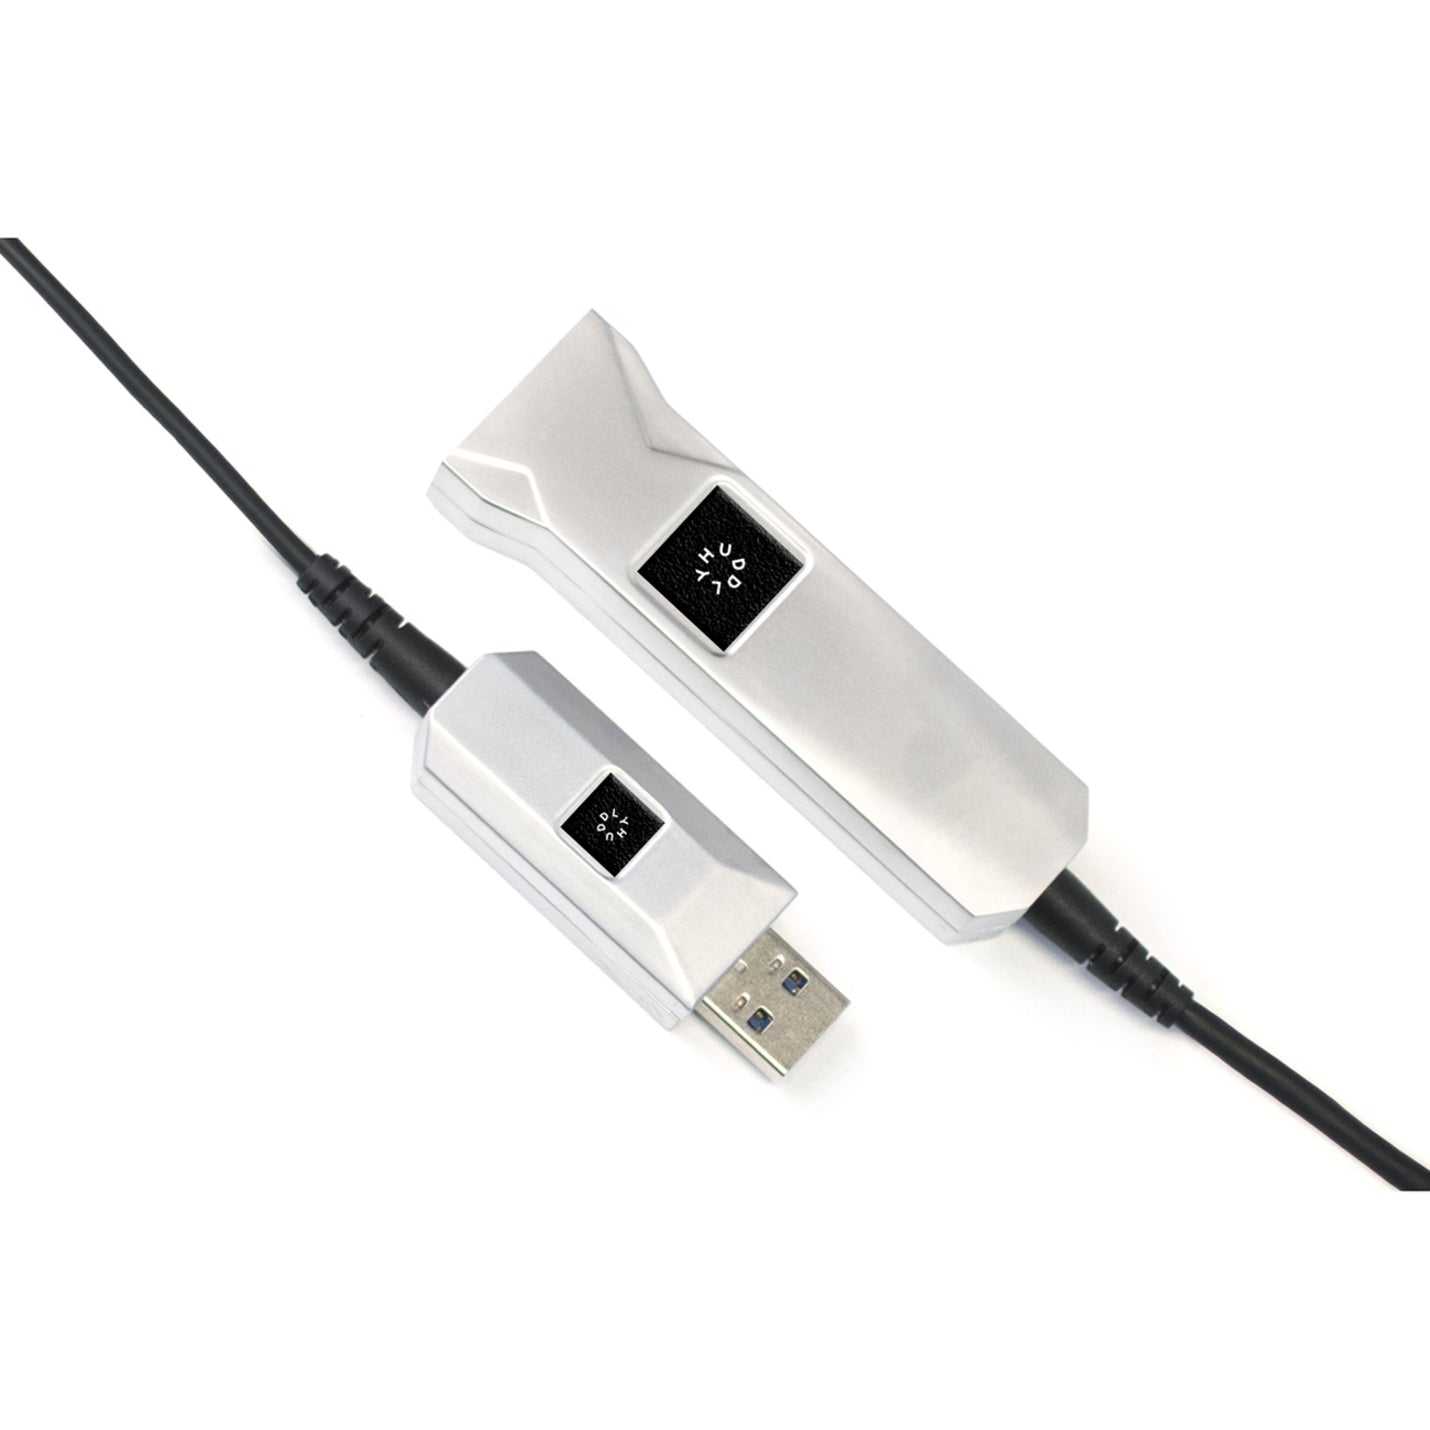 Huddly 7090043790443 USB AOC Data Transfer Cable, 16.40 ft Extension Cable